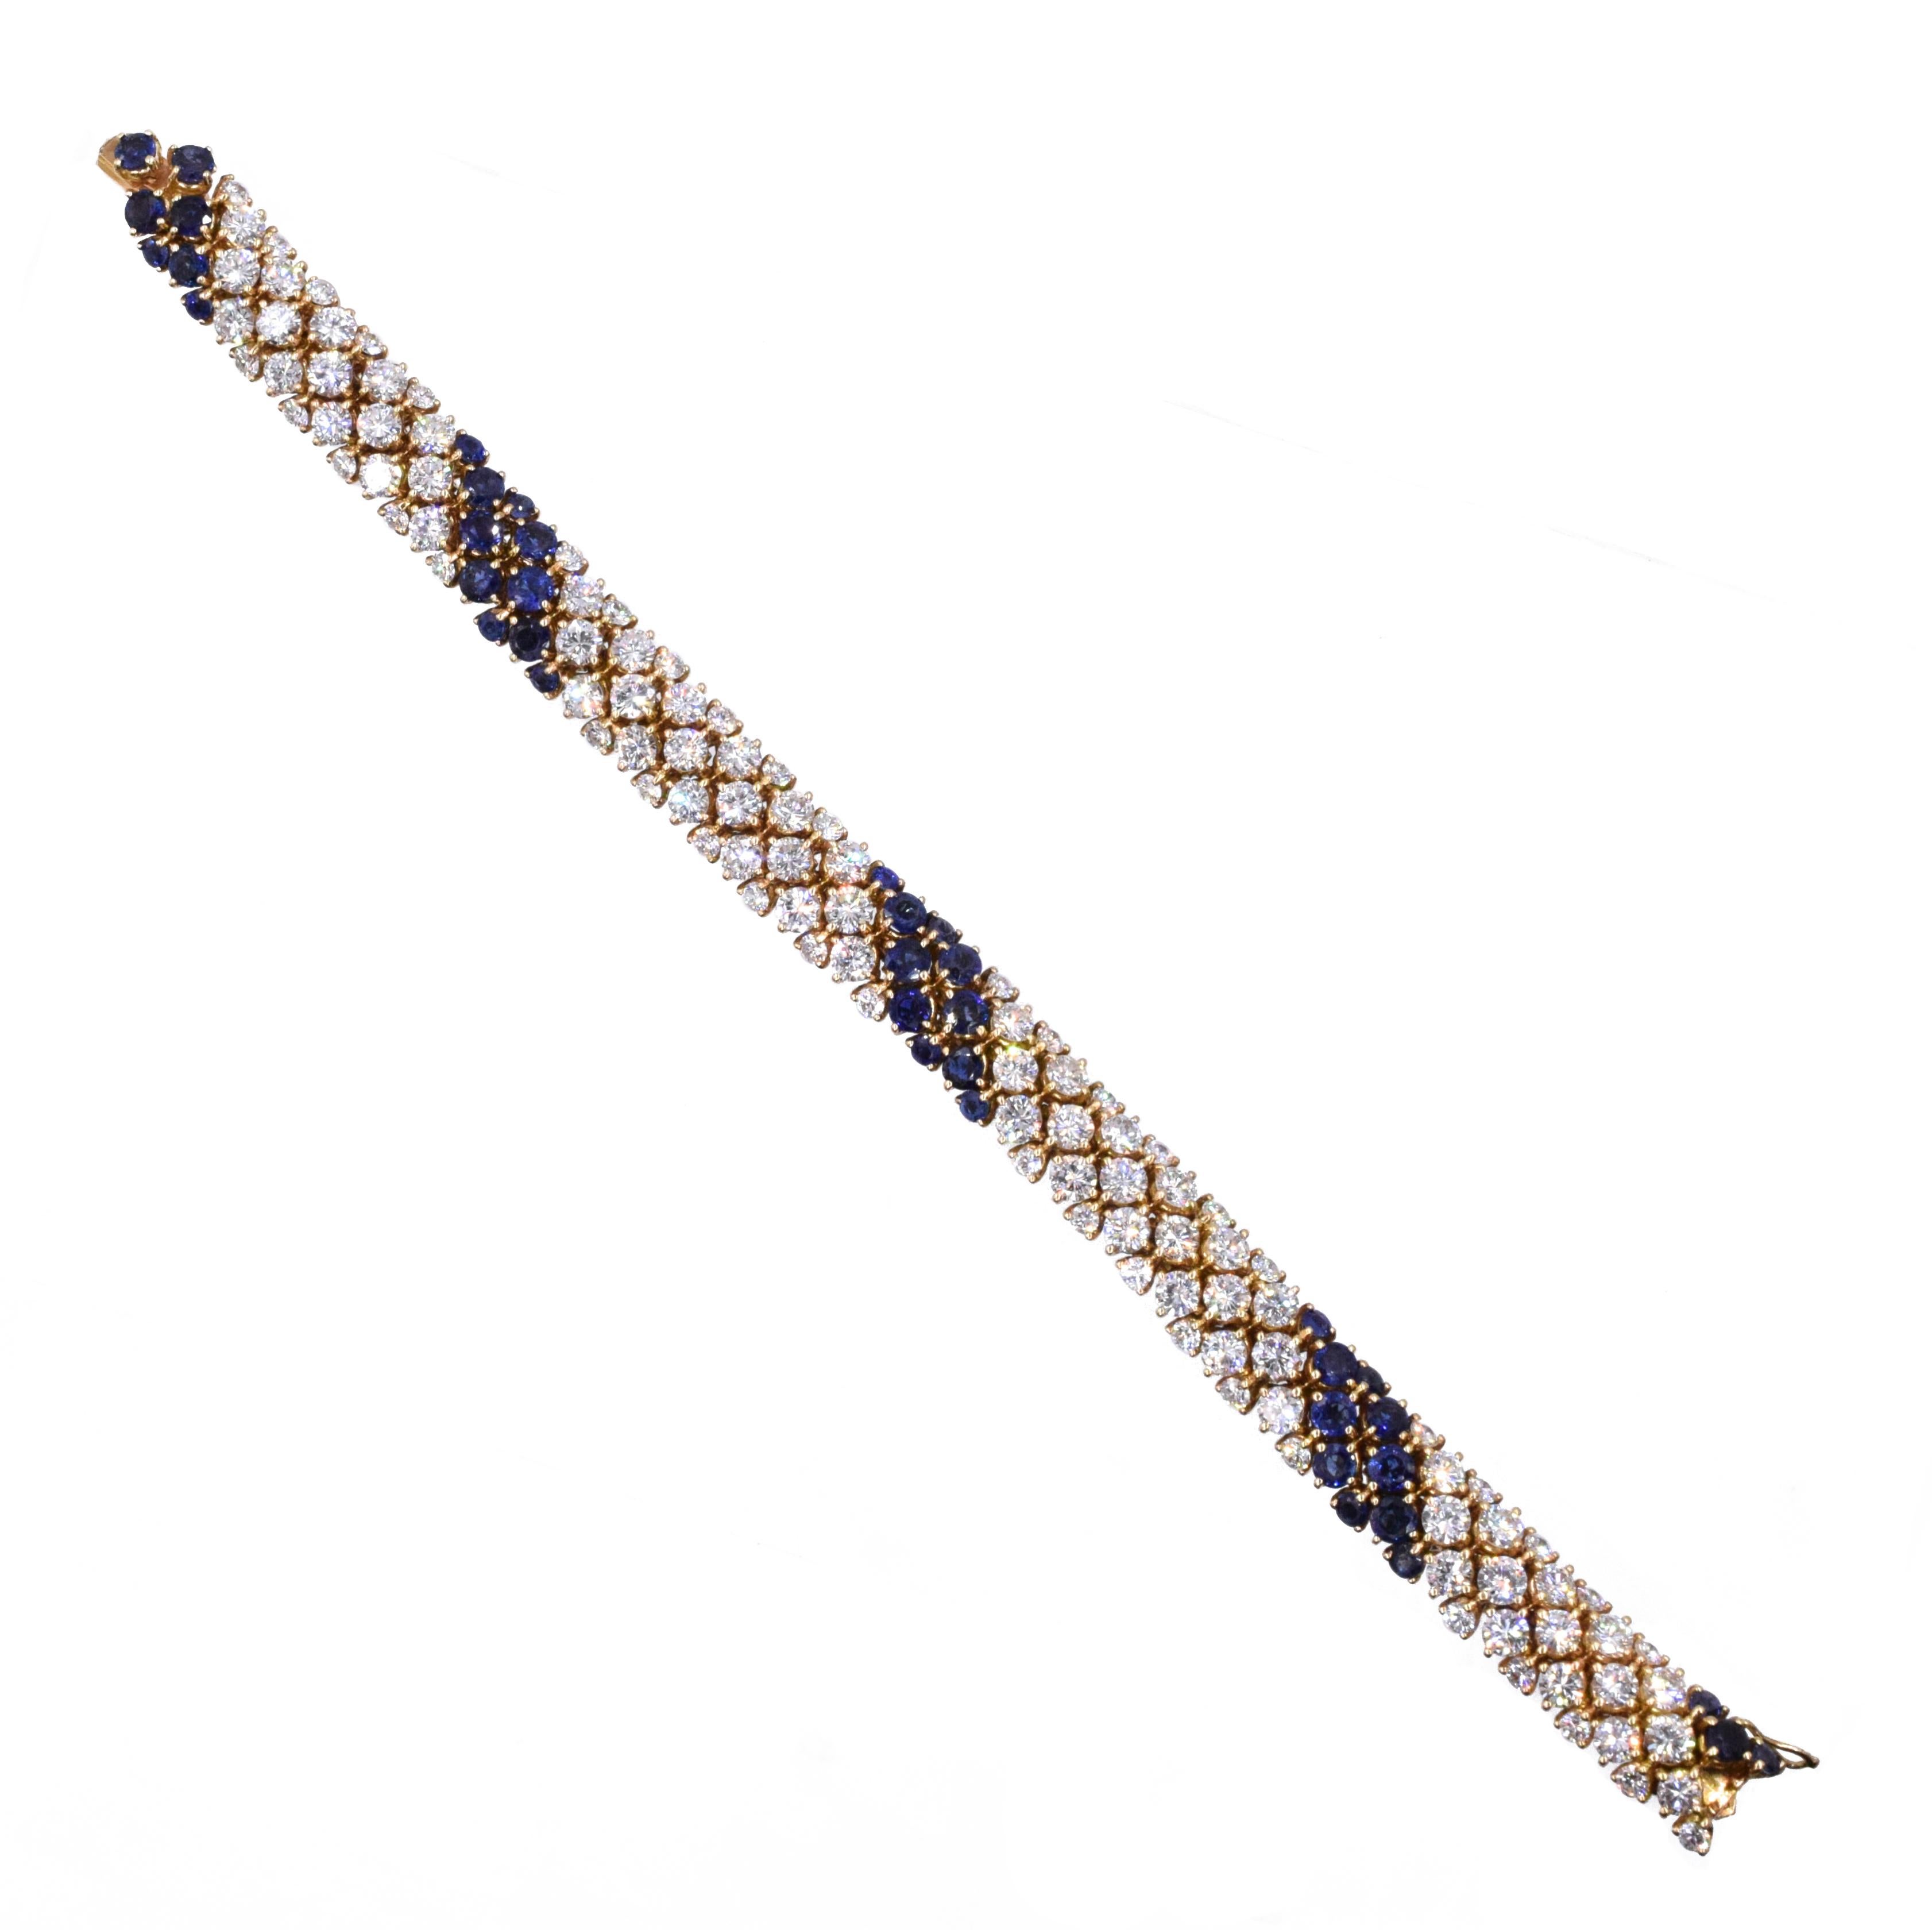 Diamond and Sapphire 'Pelouse' Bracelet by Van Cleef & Arpels. 
The bracelet has circular- cut sapphires & circular- cut diamonds approximately 15 carats all set in 18k yellow gold, 
Length: 7.5 inches 
Signed VCA, Made in France, Serial No. xxxx,